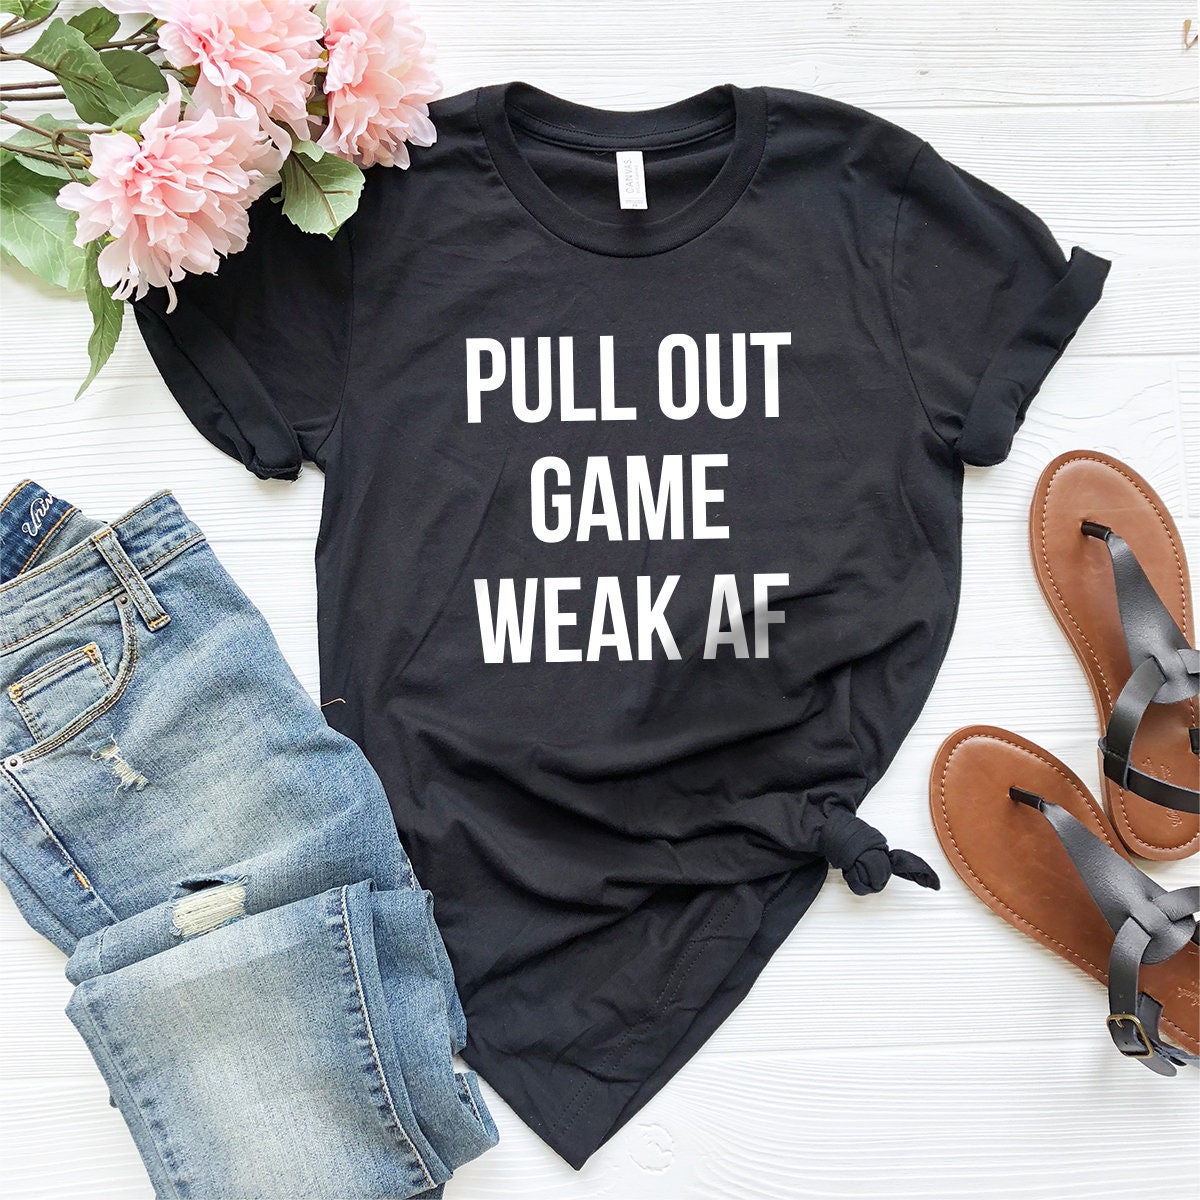 Funny Dad Shirt,  Shirt , Dad Gift, Pull Out Game Weak Af T Shirt, Fatherhood Shirt, Funny Daddy Shirt, Graphic Tee For Dad - Fastdeliverytees.com